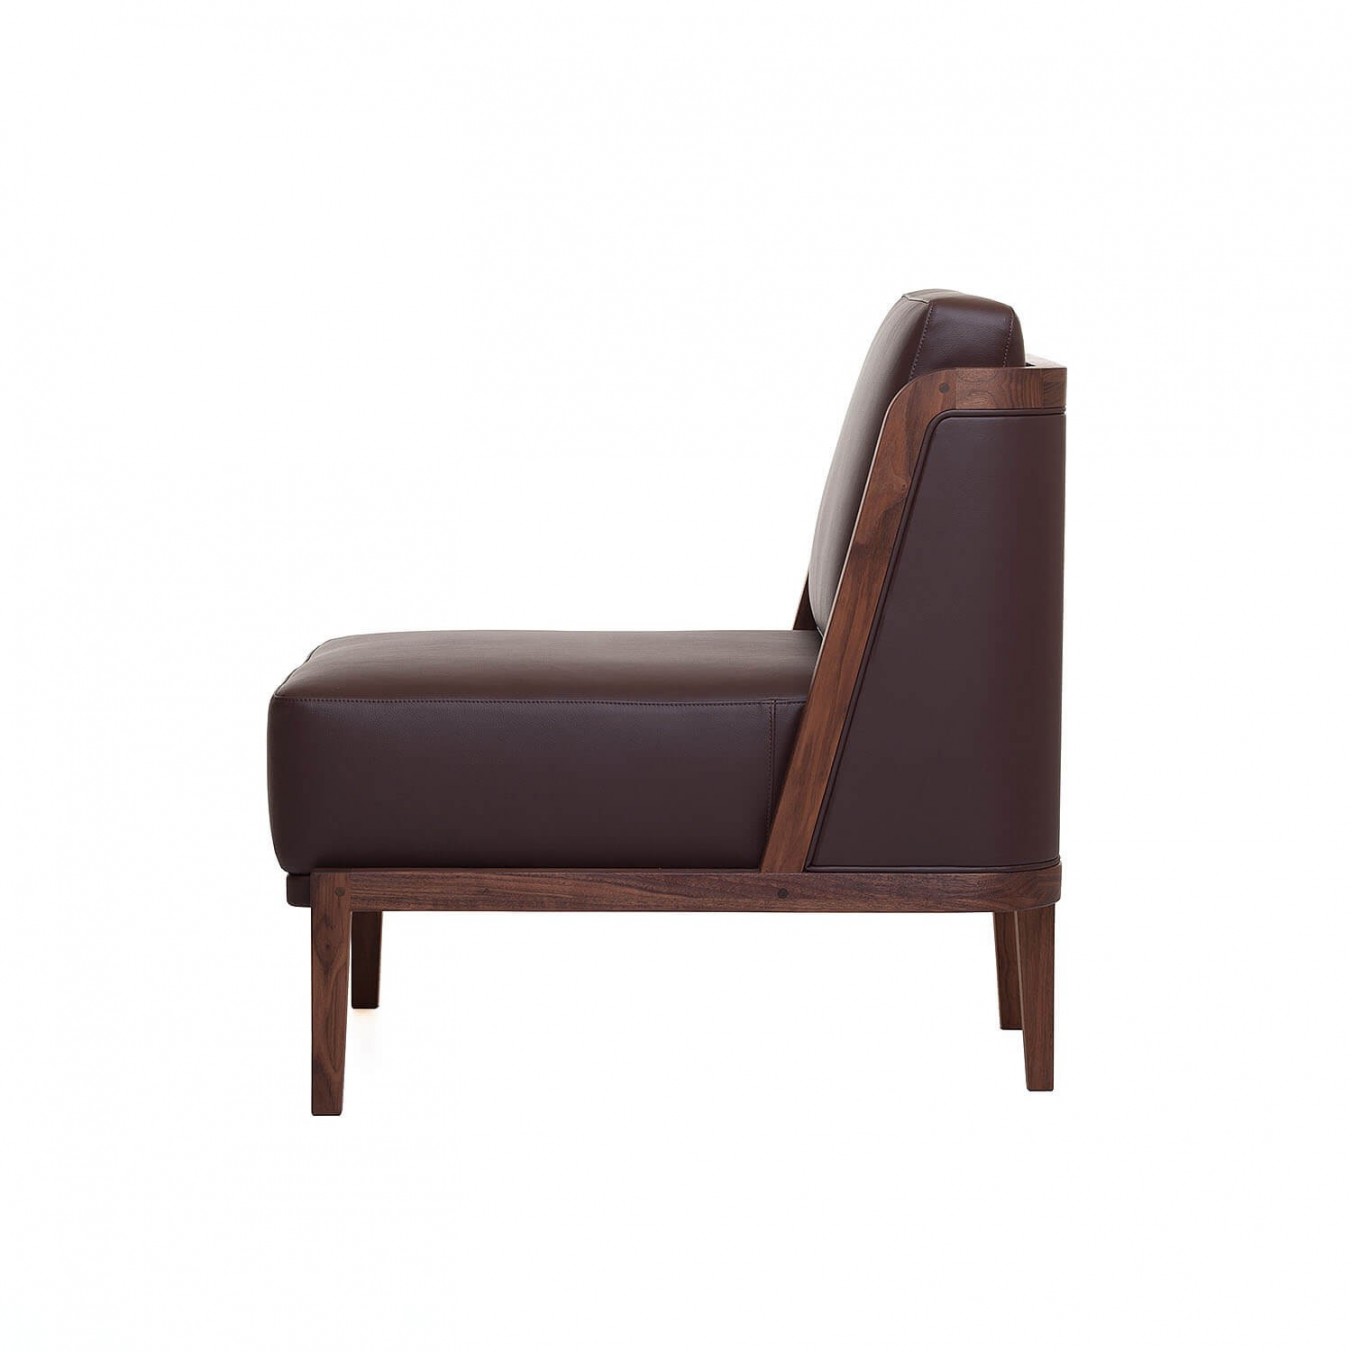 THRONE LOUNGE CHAIR WITH UPHOLSTERY